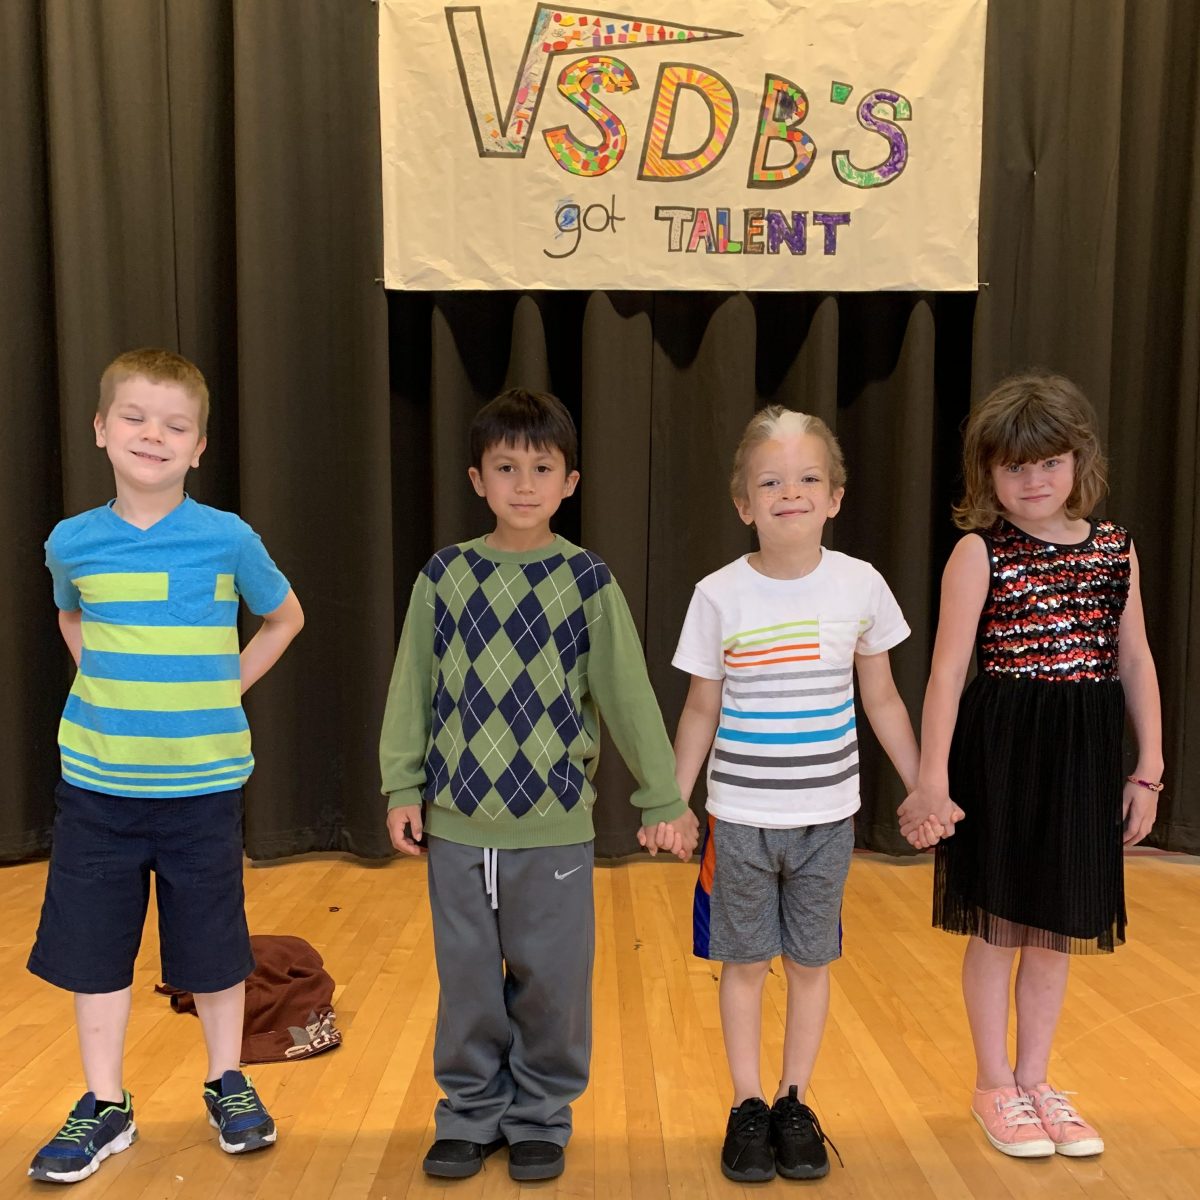 VSDB's Got Talent, 4 preschool students standing on stage with a handmade sign behind them